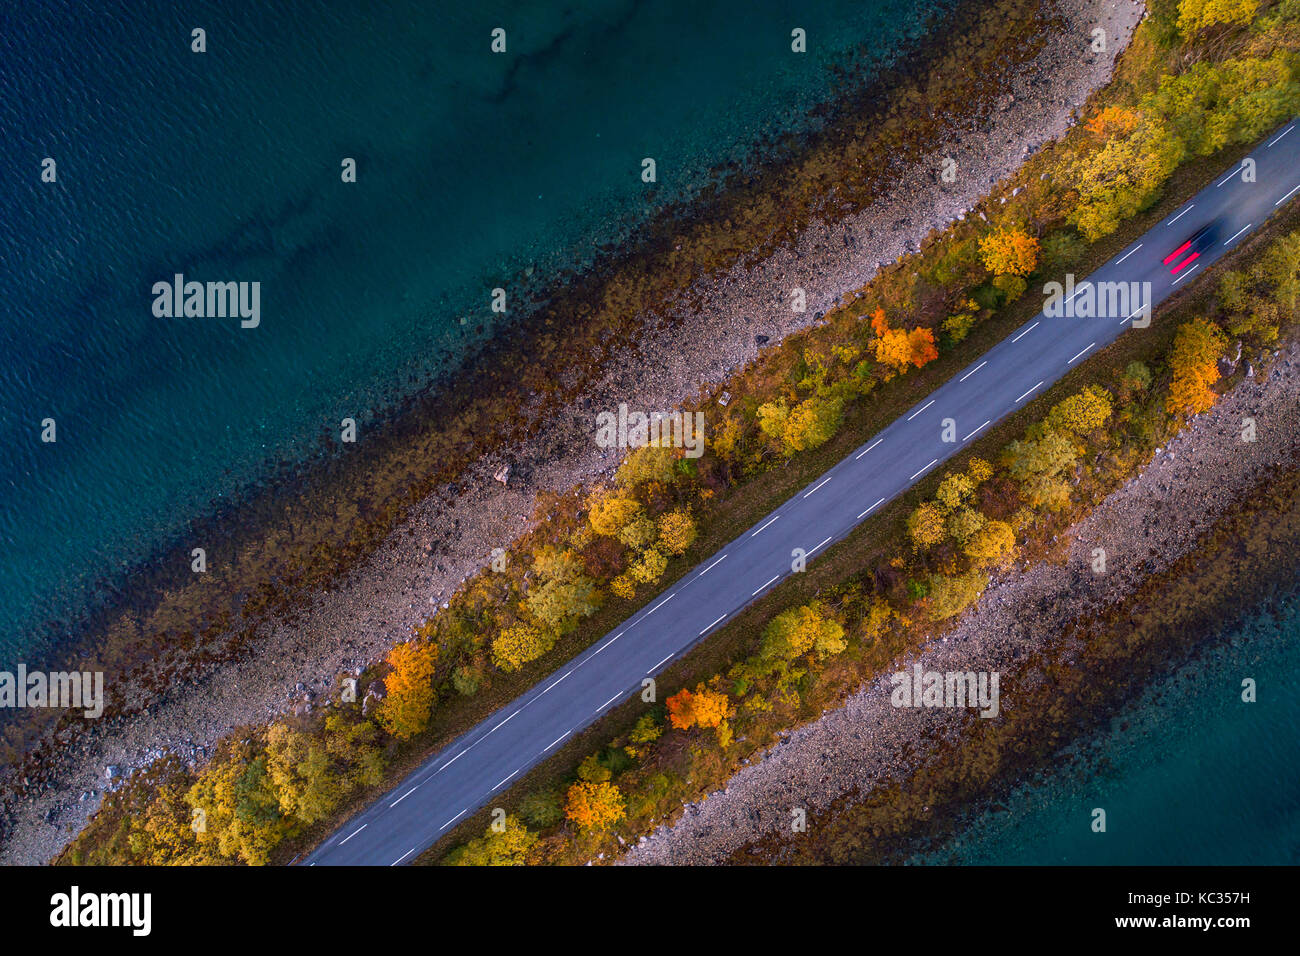 Aerial shot of a car on the road between two coastlines going through avenue of trees in autumn colors. Blue sea shore. Norway Stock Photo